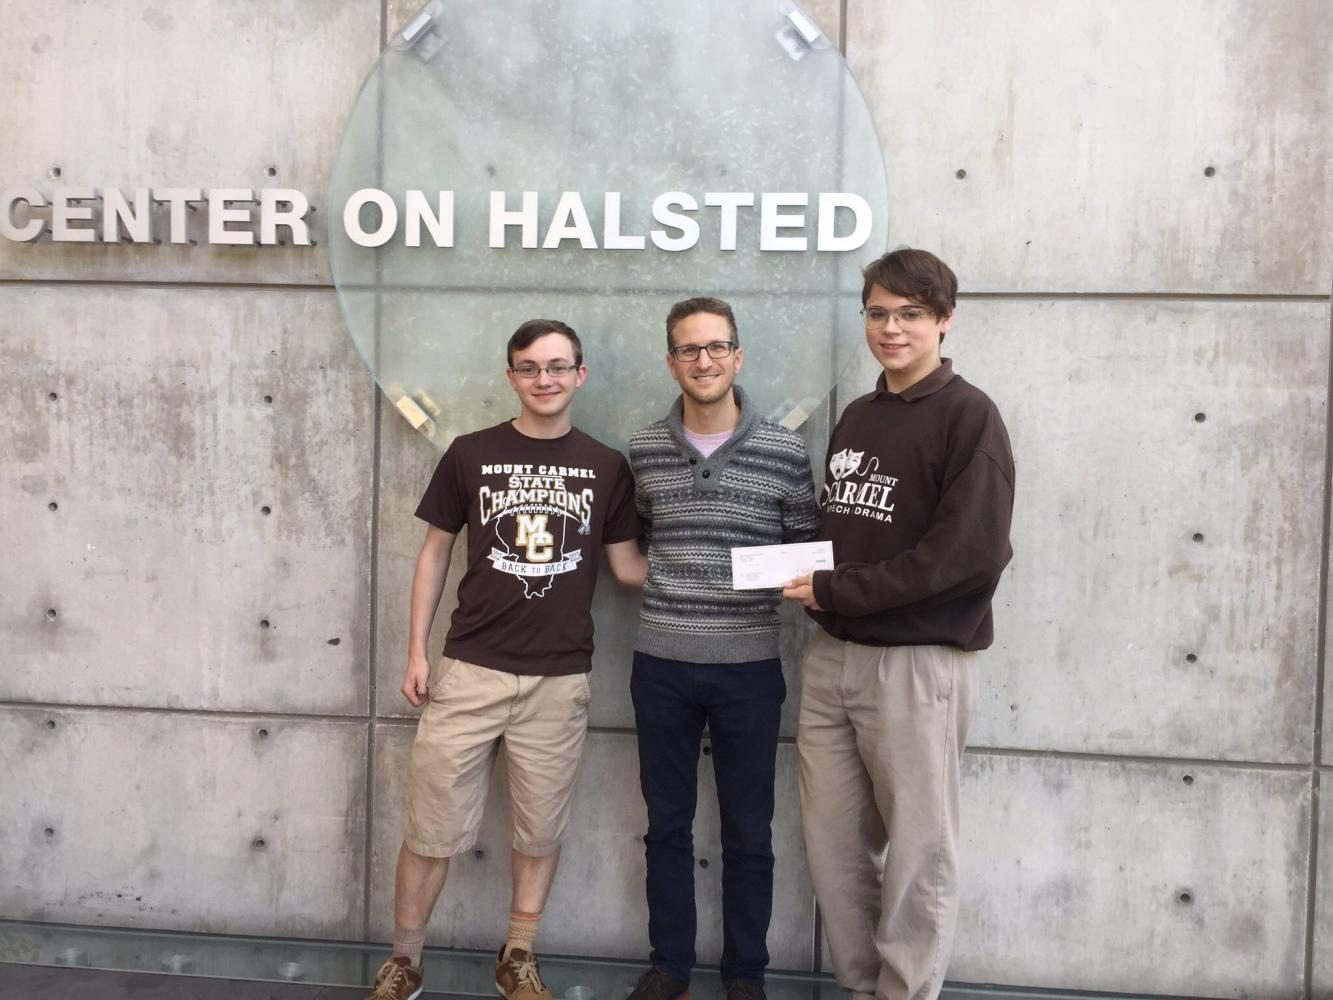 MCGSA cofounders Luke Ehrenstrom (left) and Patrick McKay donated $500  to Center on Halsted on May 25 on behalf of MCGSA.